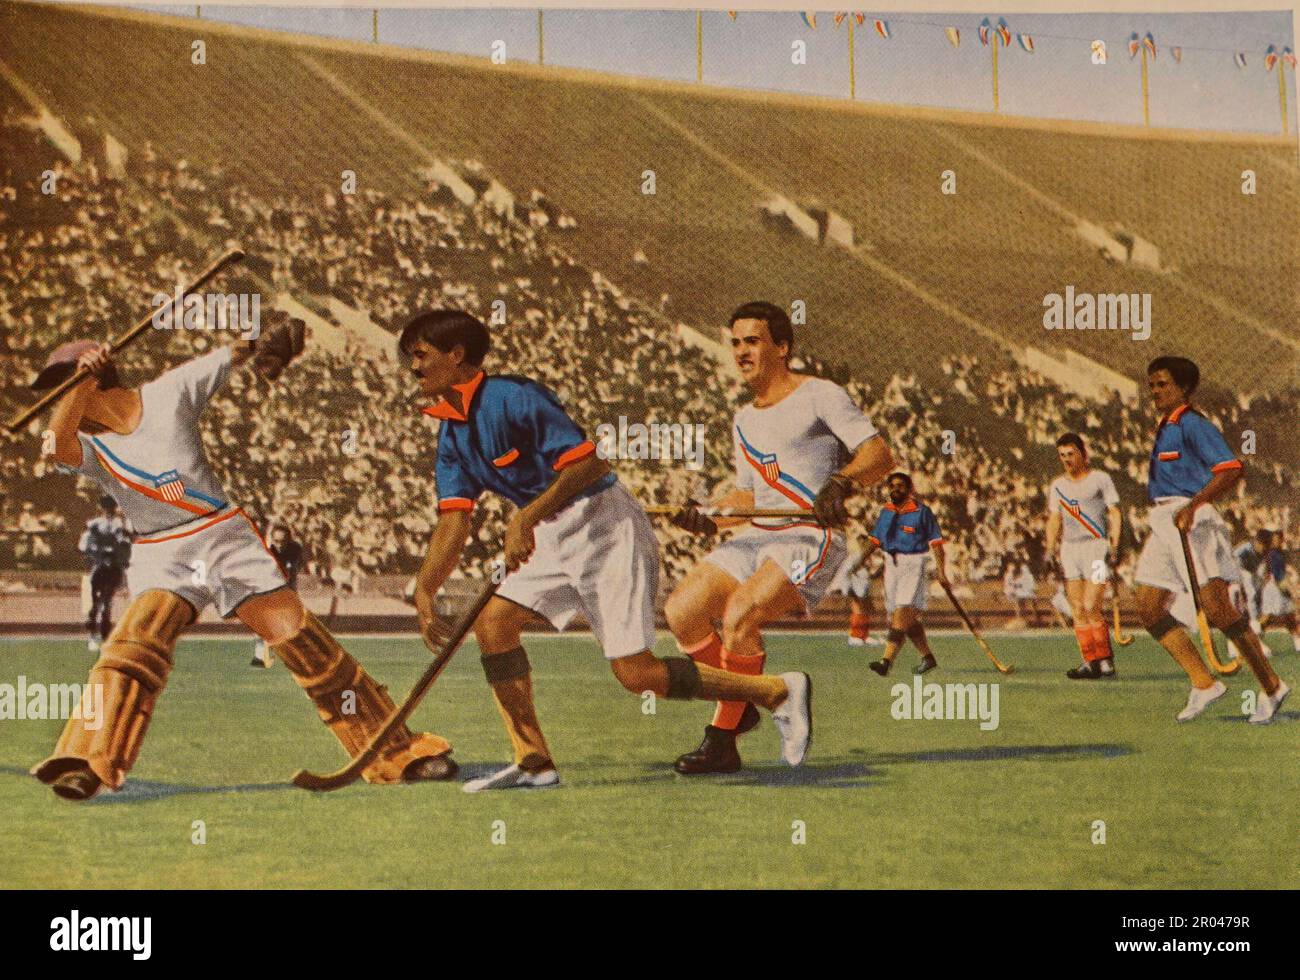 The 1932 Olympics held in Los Angeles, USA, saw the Indian hockey team defeat the USA 24-1 in the final match and claim the gold medal. Stock Photo